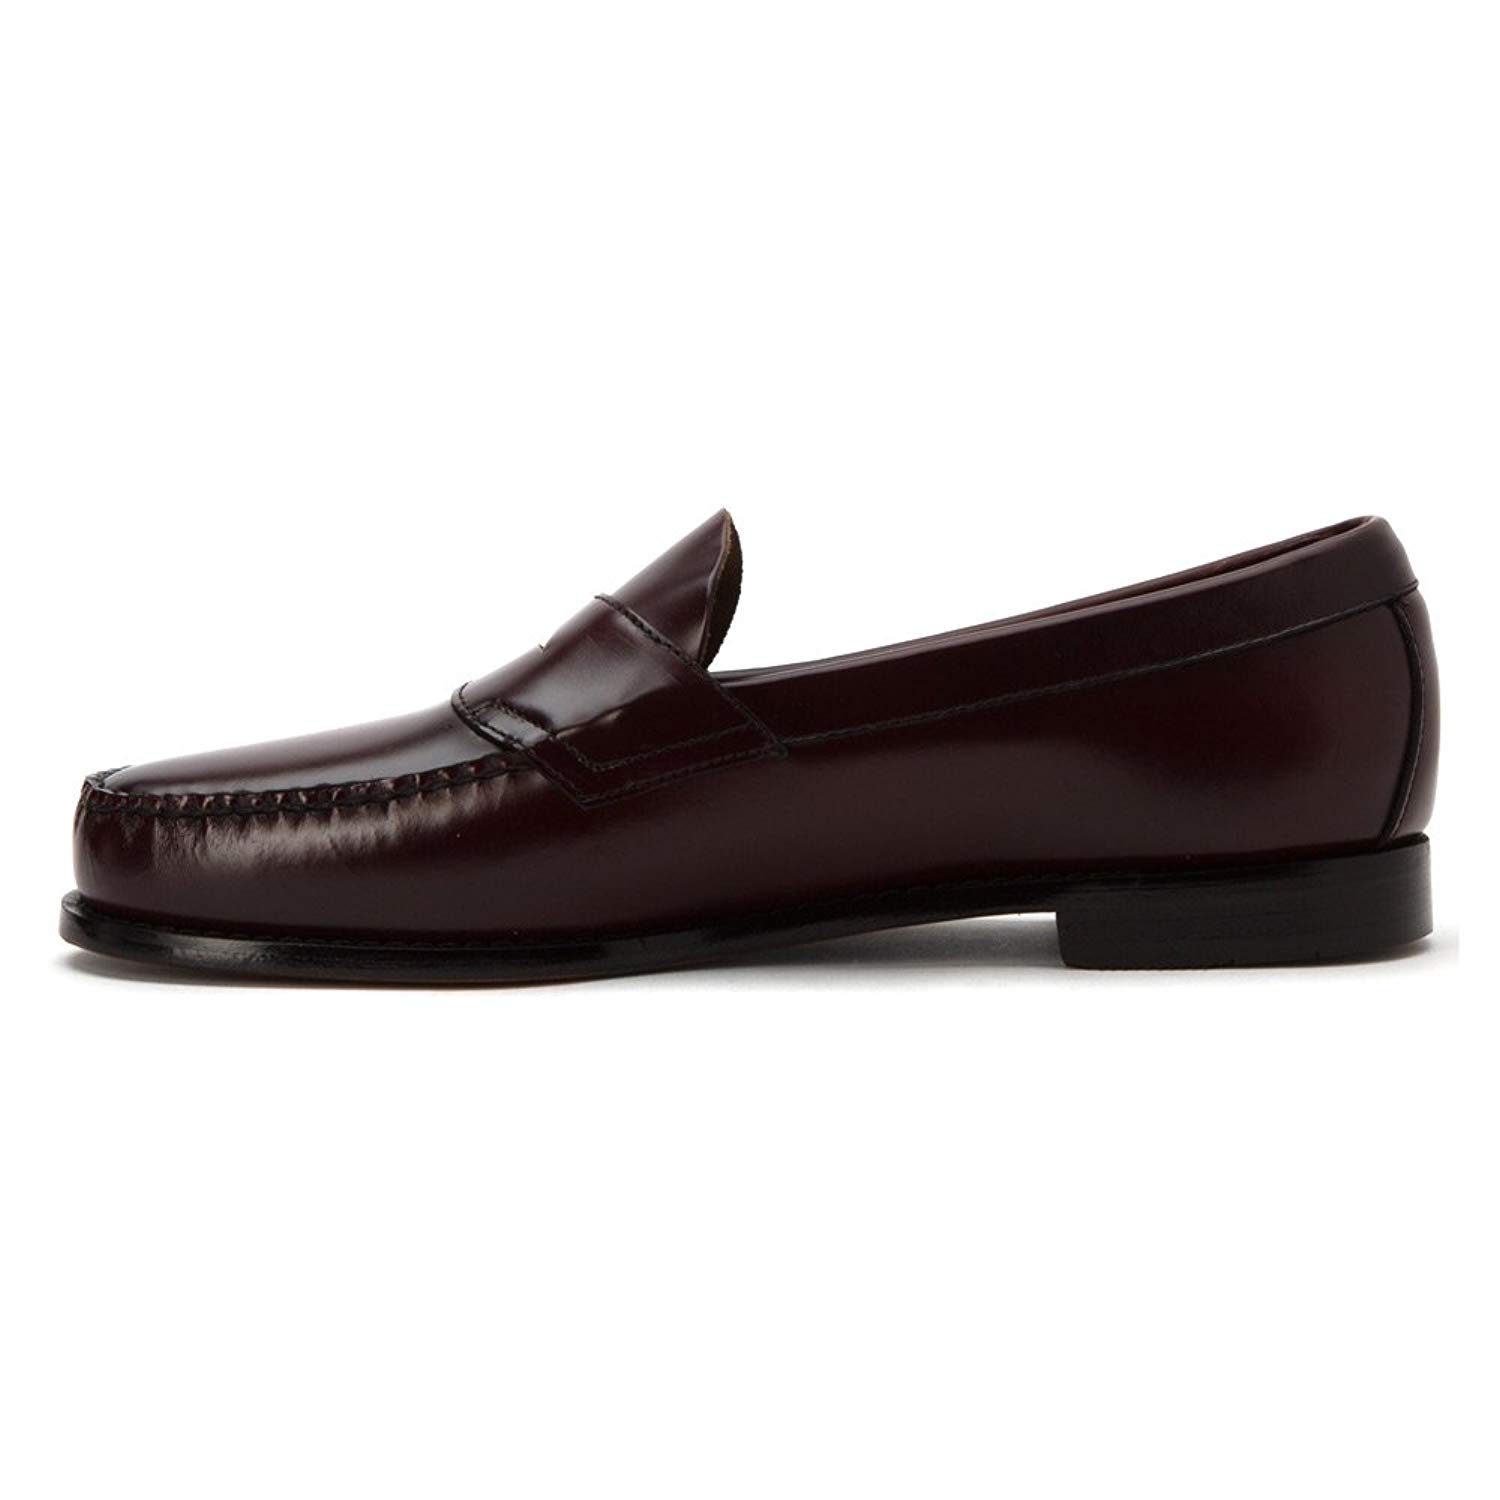 Bass Mens Logan Leather Closed Toe Penny Loafer, Burgundy, Size 7.5 | eBay